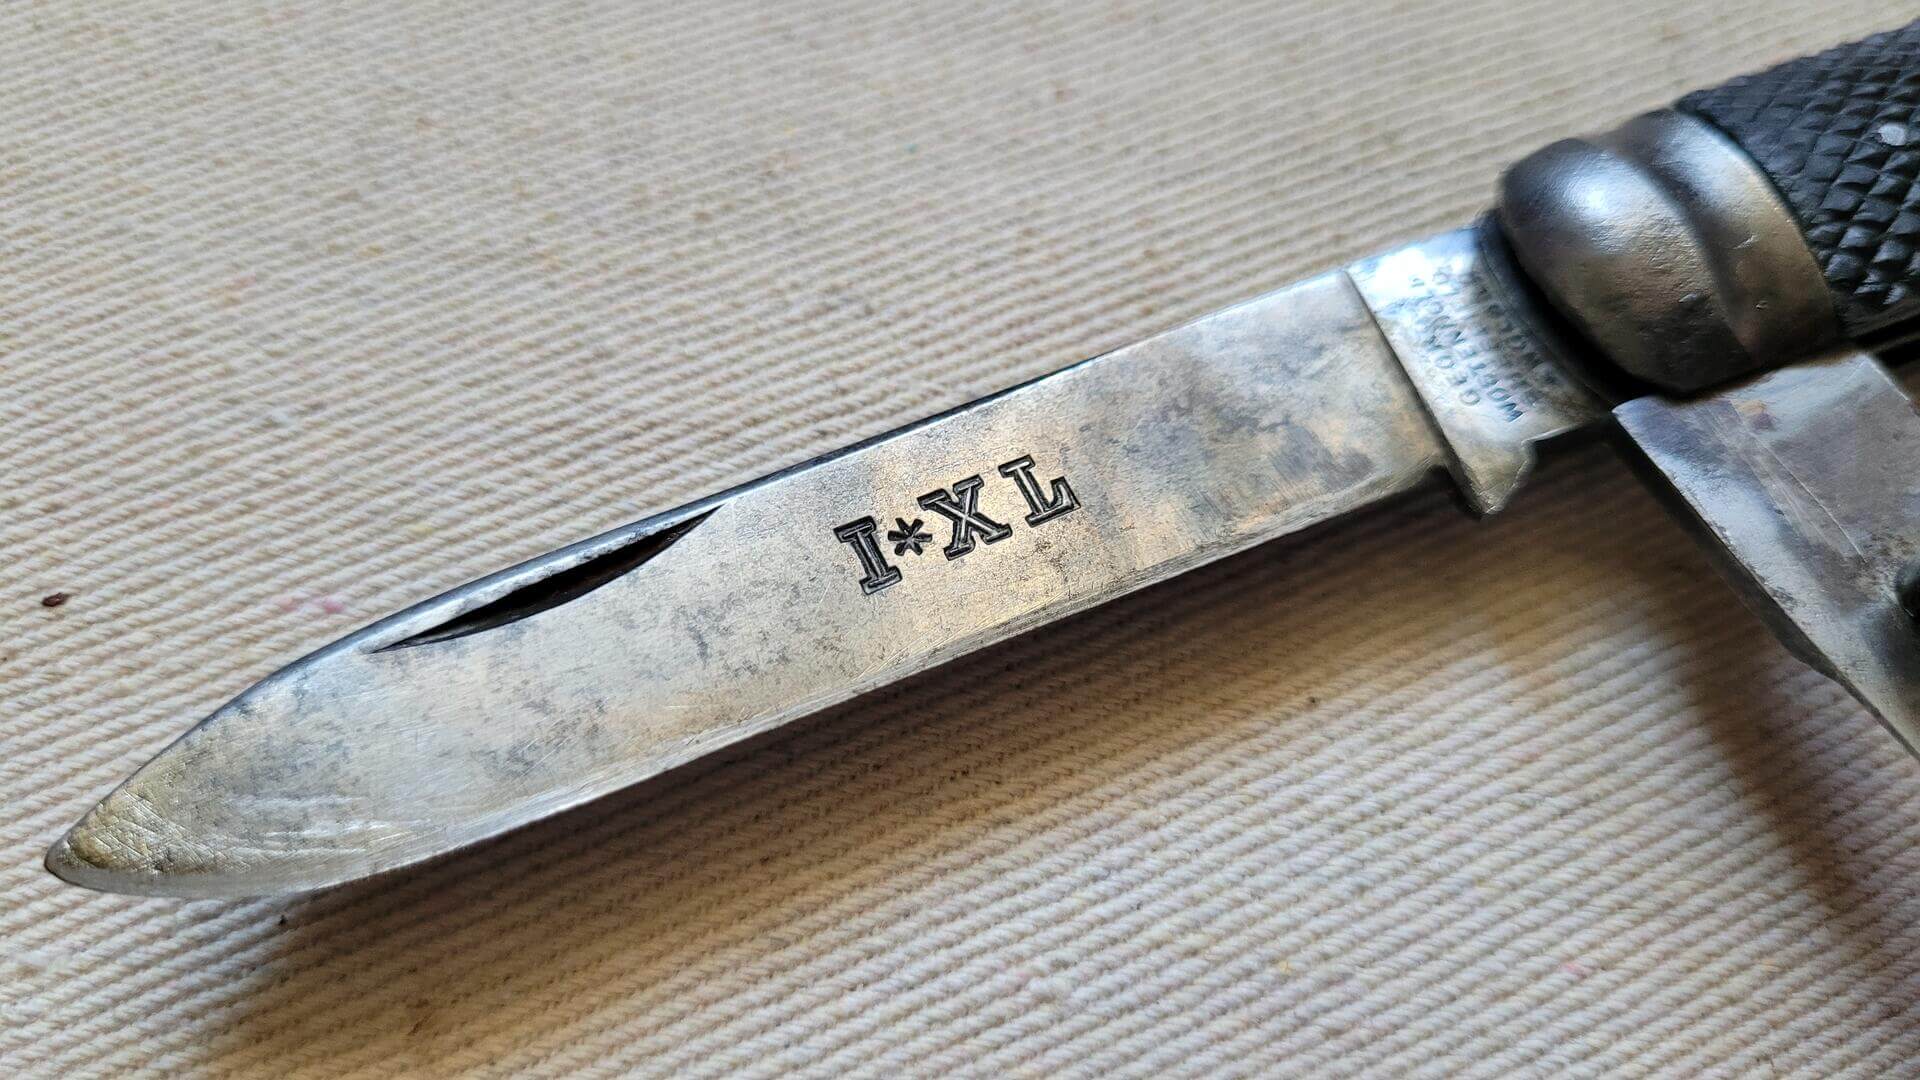 Rare Vintage IXL George Wostenholm Army Folding Knife Sheffield England - Antique World War I WWI collectible military knives and memorabilia